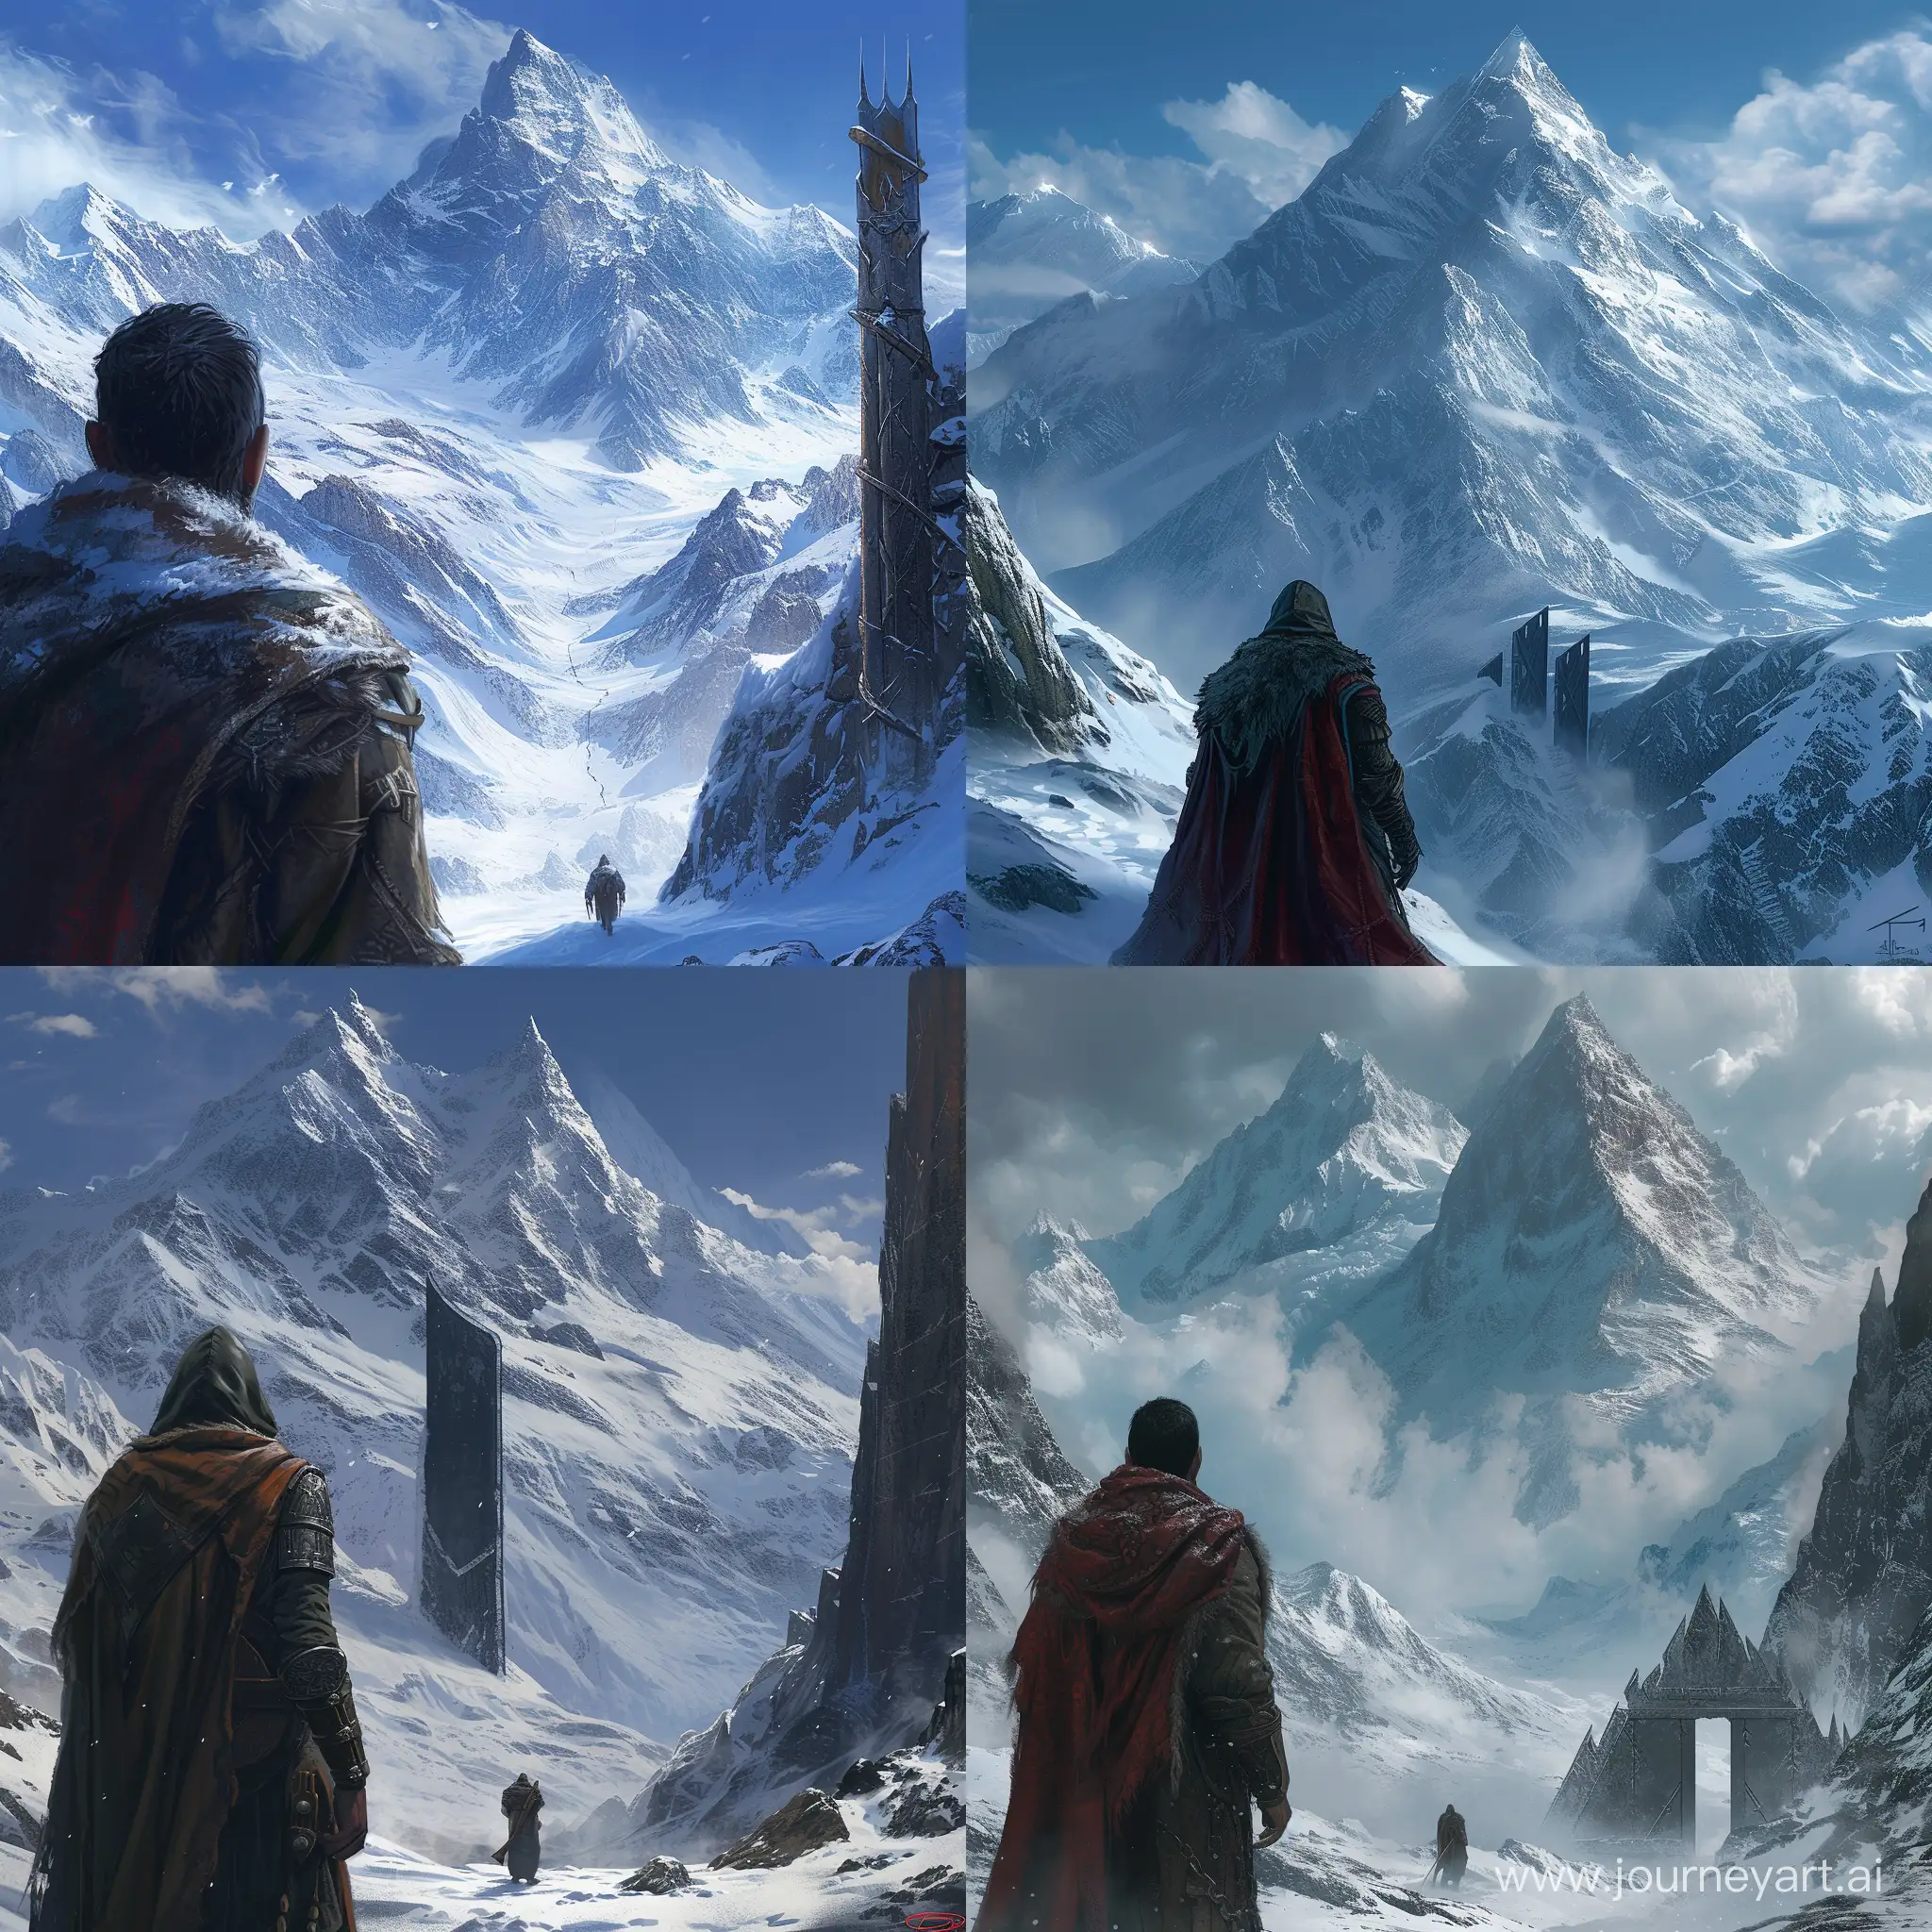 giant - a fourteen-thousander mountain, a medieval merchant, a figure looking at a snow-covered range, in the distance you can see a steel gate made by Dwarves leading deep into the mountains, concept art, 4k, hd